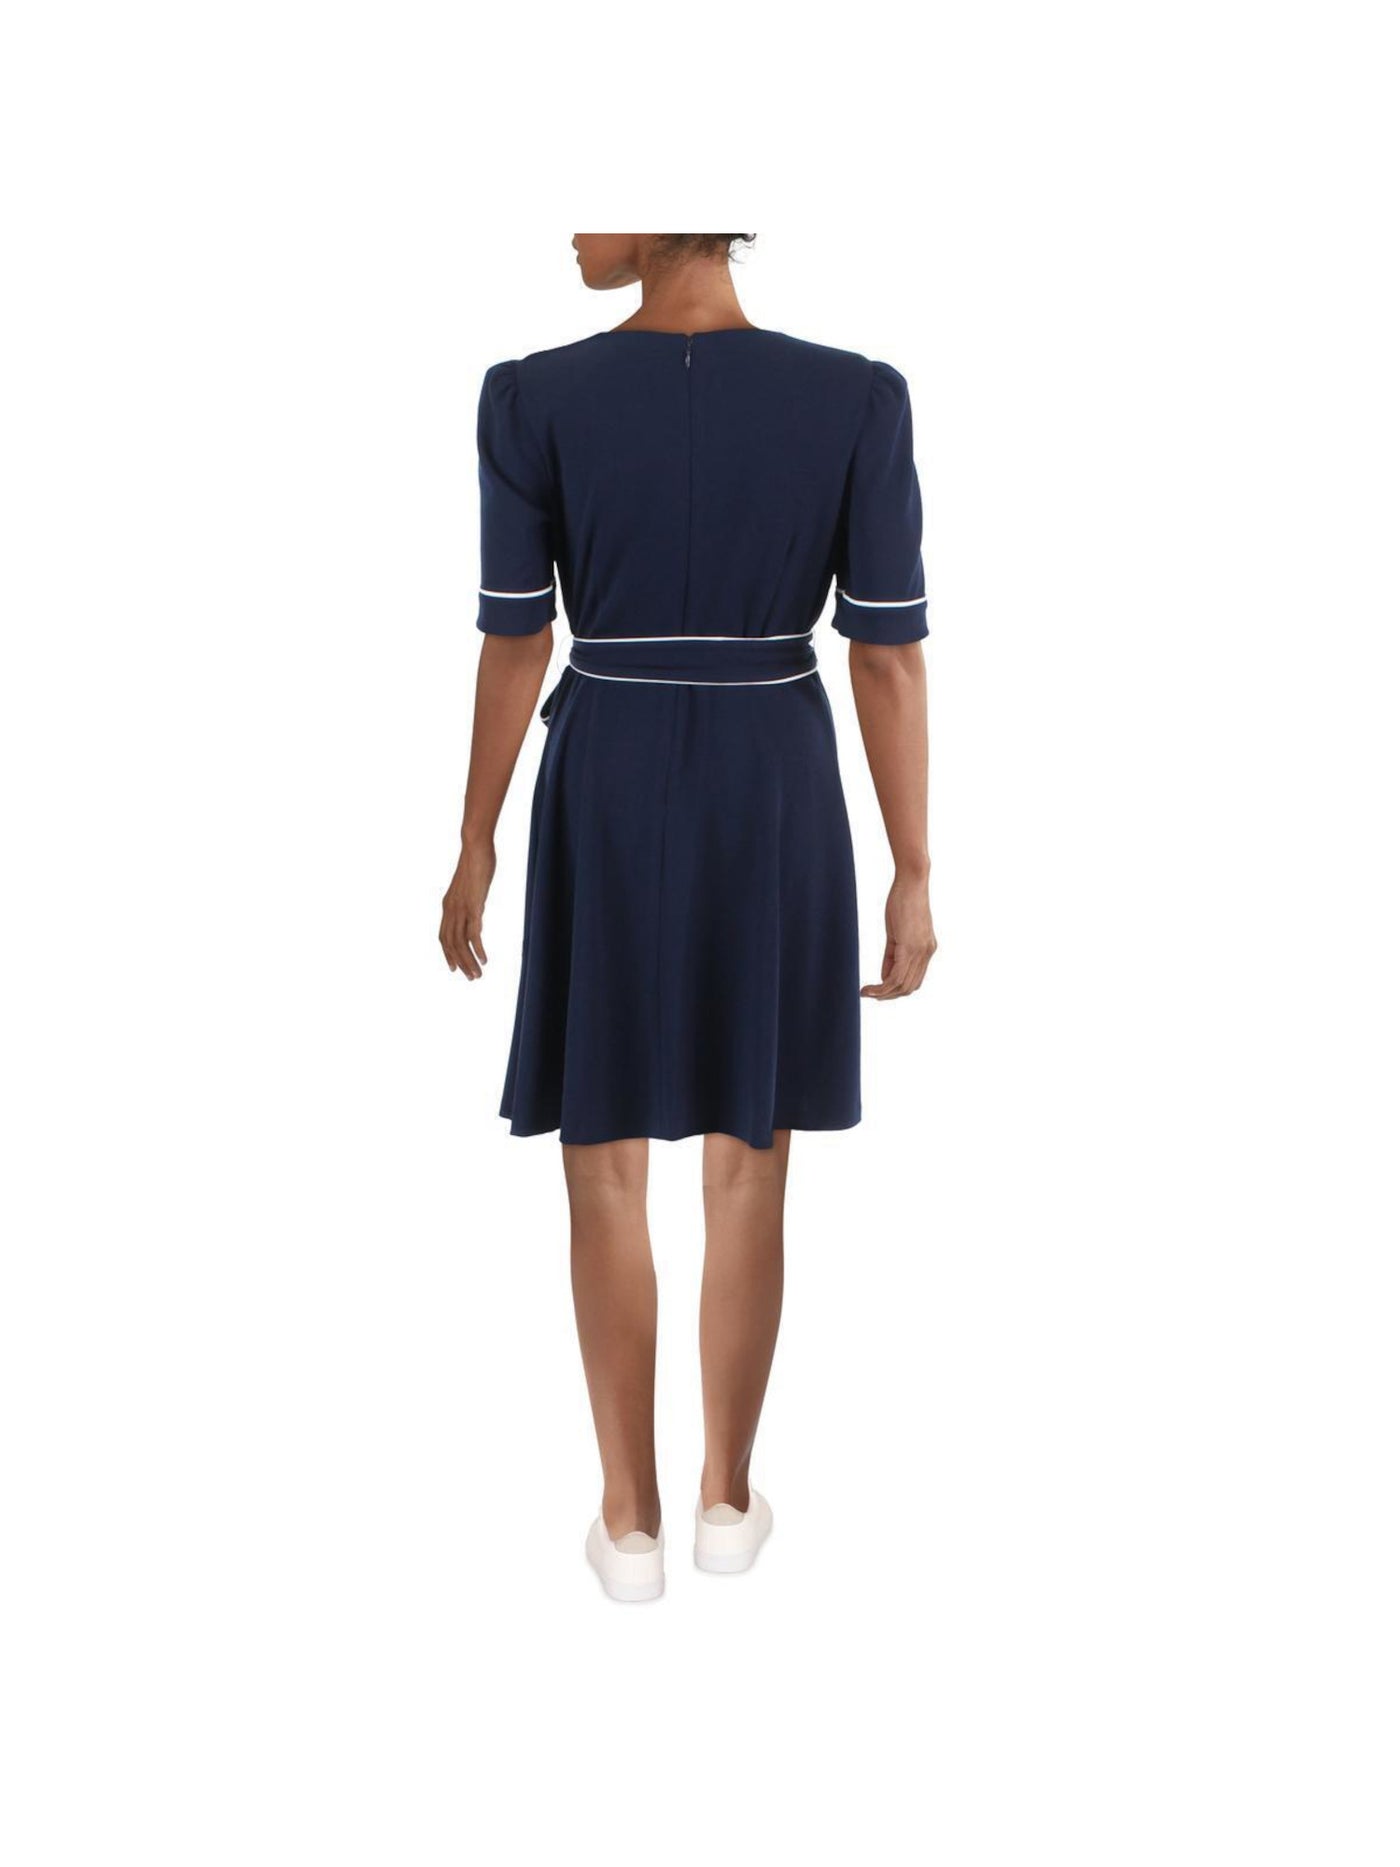 DKNY Womens Navy Zippered Belted Lined Piped Elbow Sleeve Crew Neck Above The Knee Wear To Work Fit + Flare Dress 6